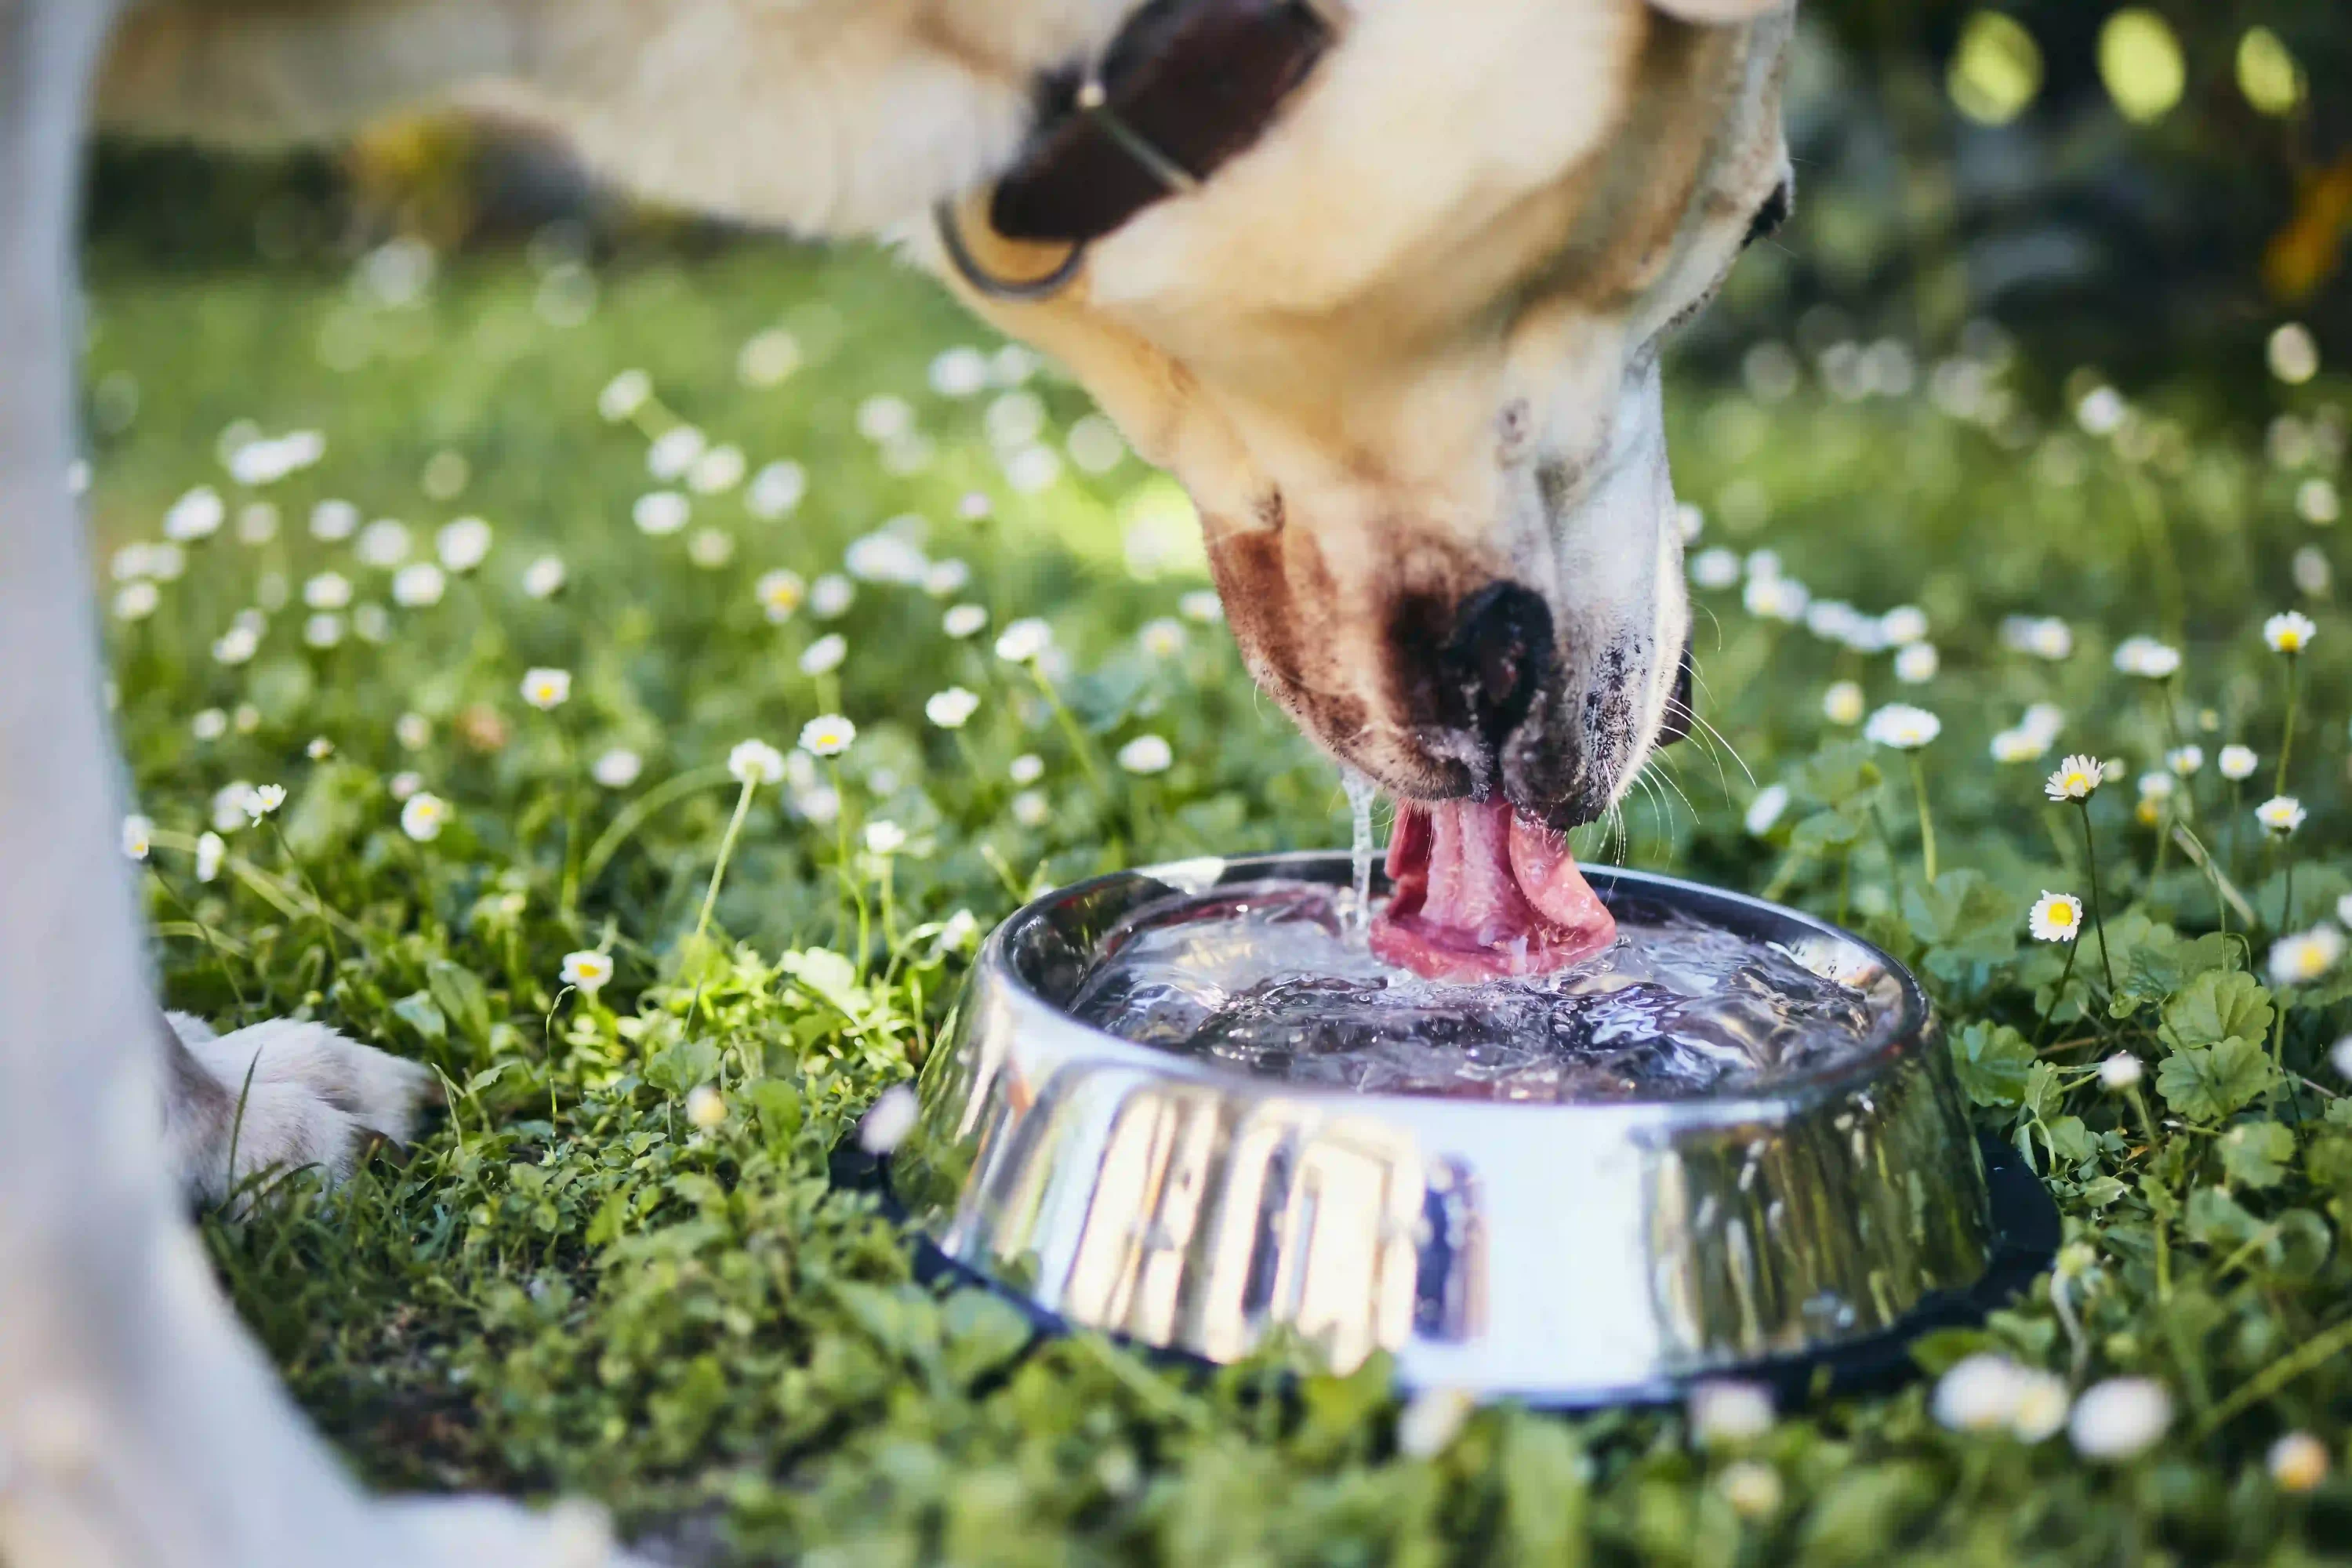 Dog drinking water. Protecting your pet in South African summer